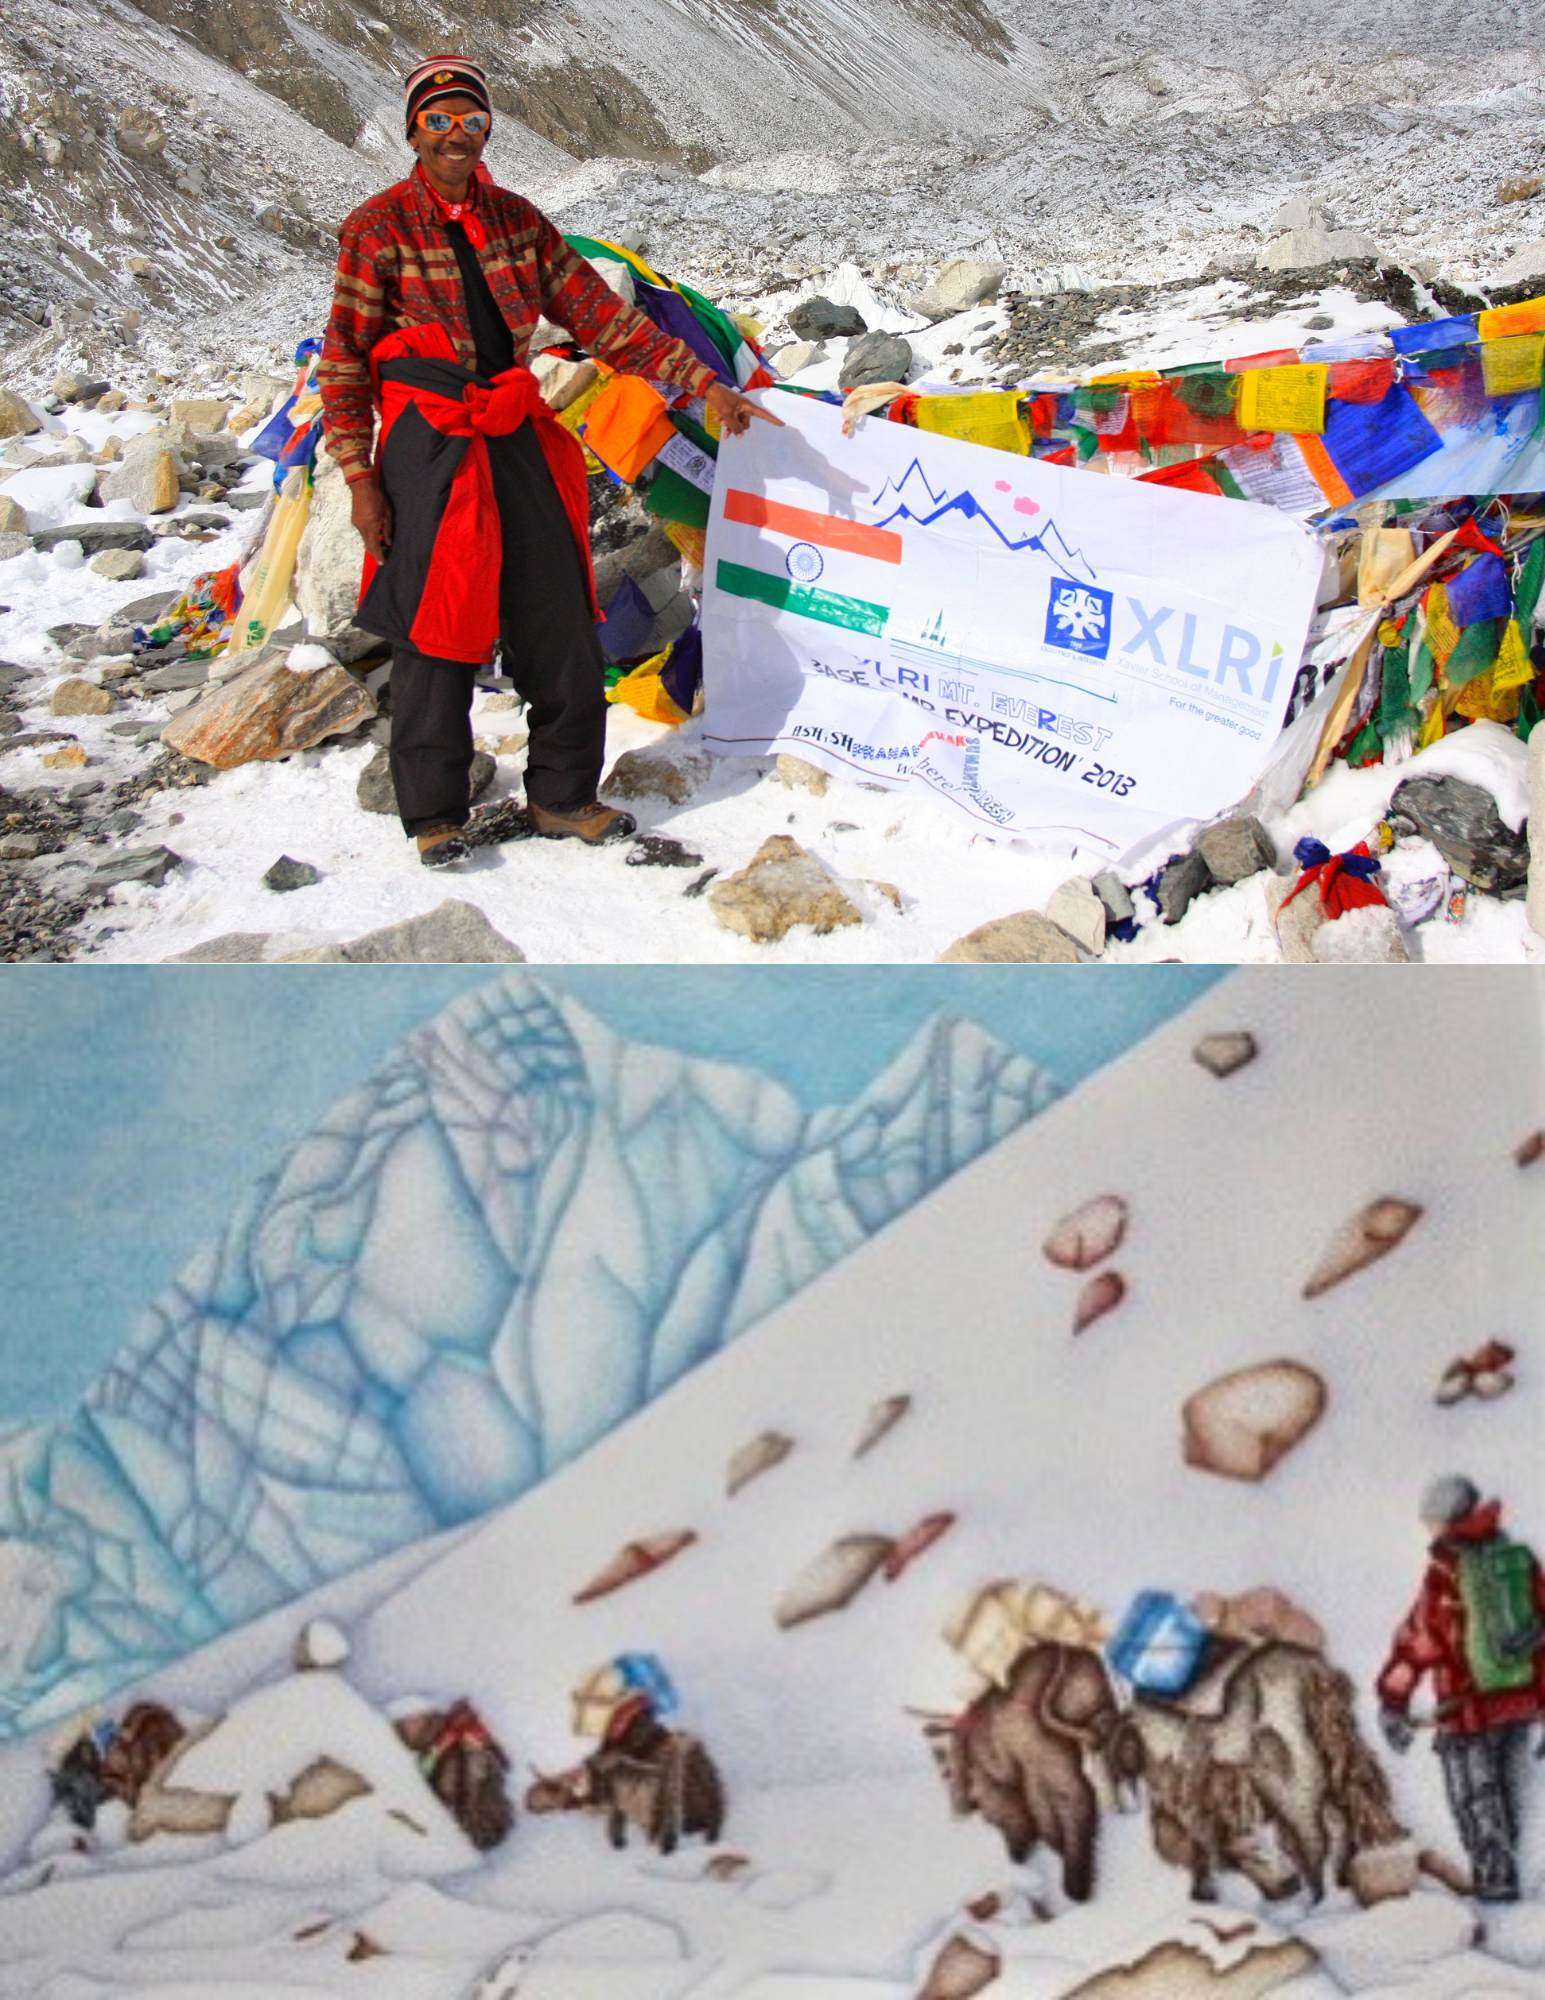 This is a combination of two pictures. One is a photograph of an African American man dressed in winter clothing on a mountain surrounded by snow pointing at a sign for the basecamp of Mt. Everest and then a pointillism painting by the man of a scene on the mountain with trekkers and pack animals